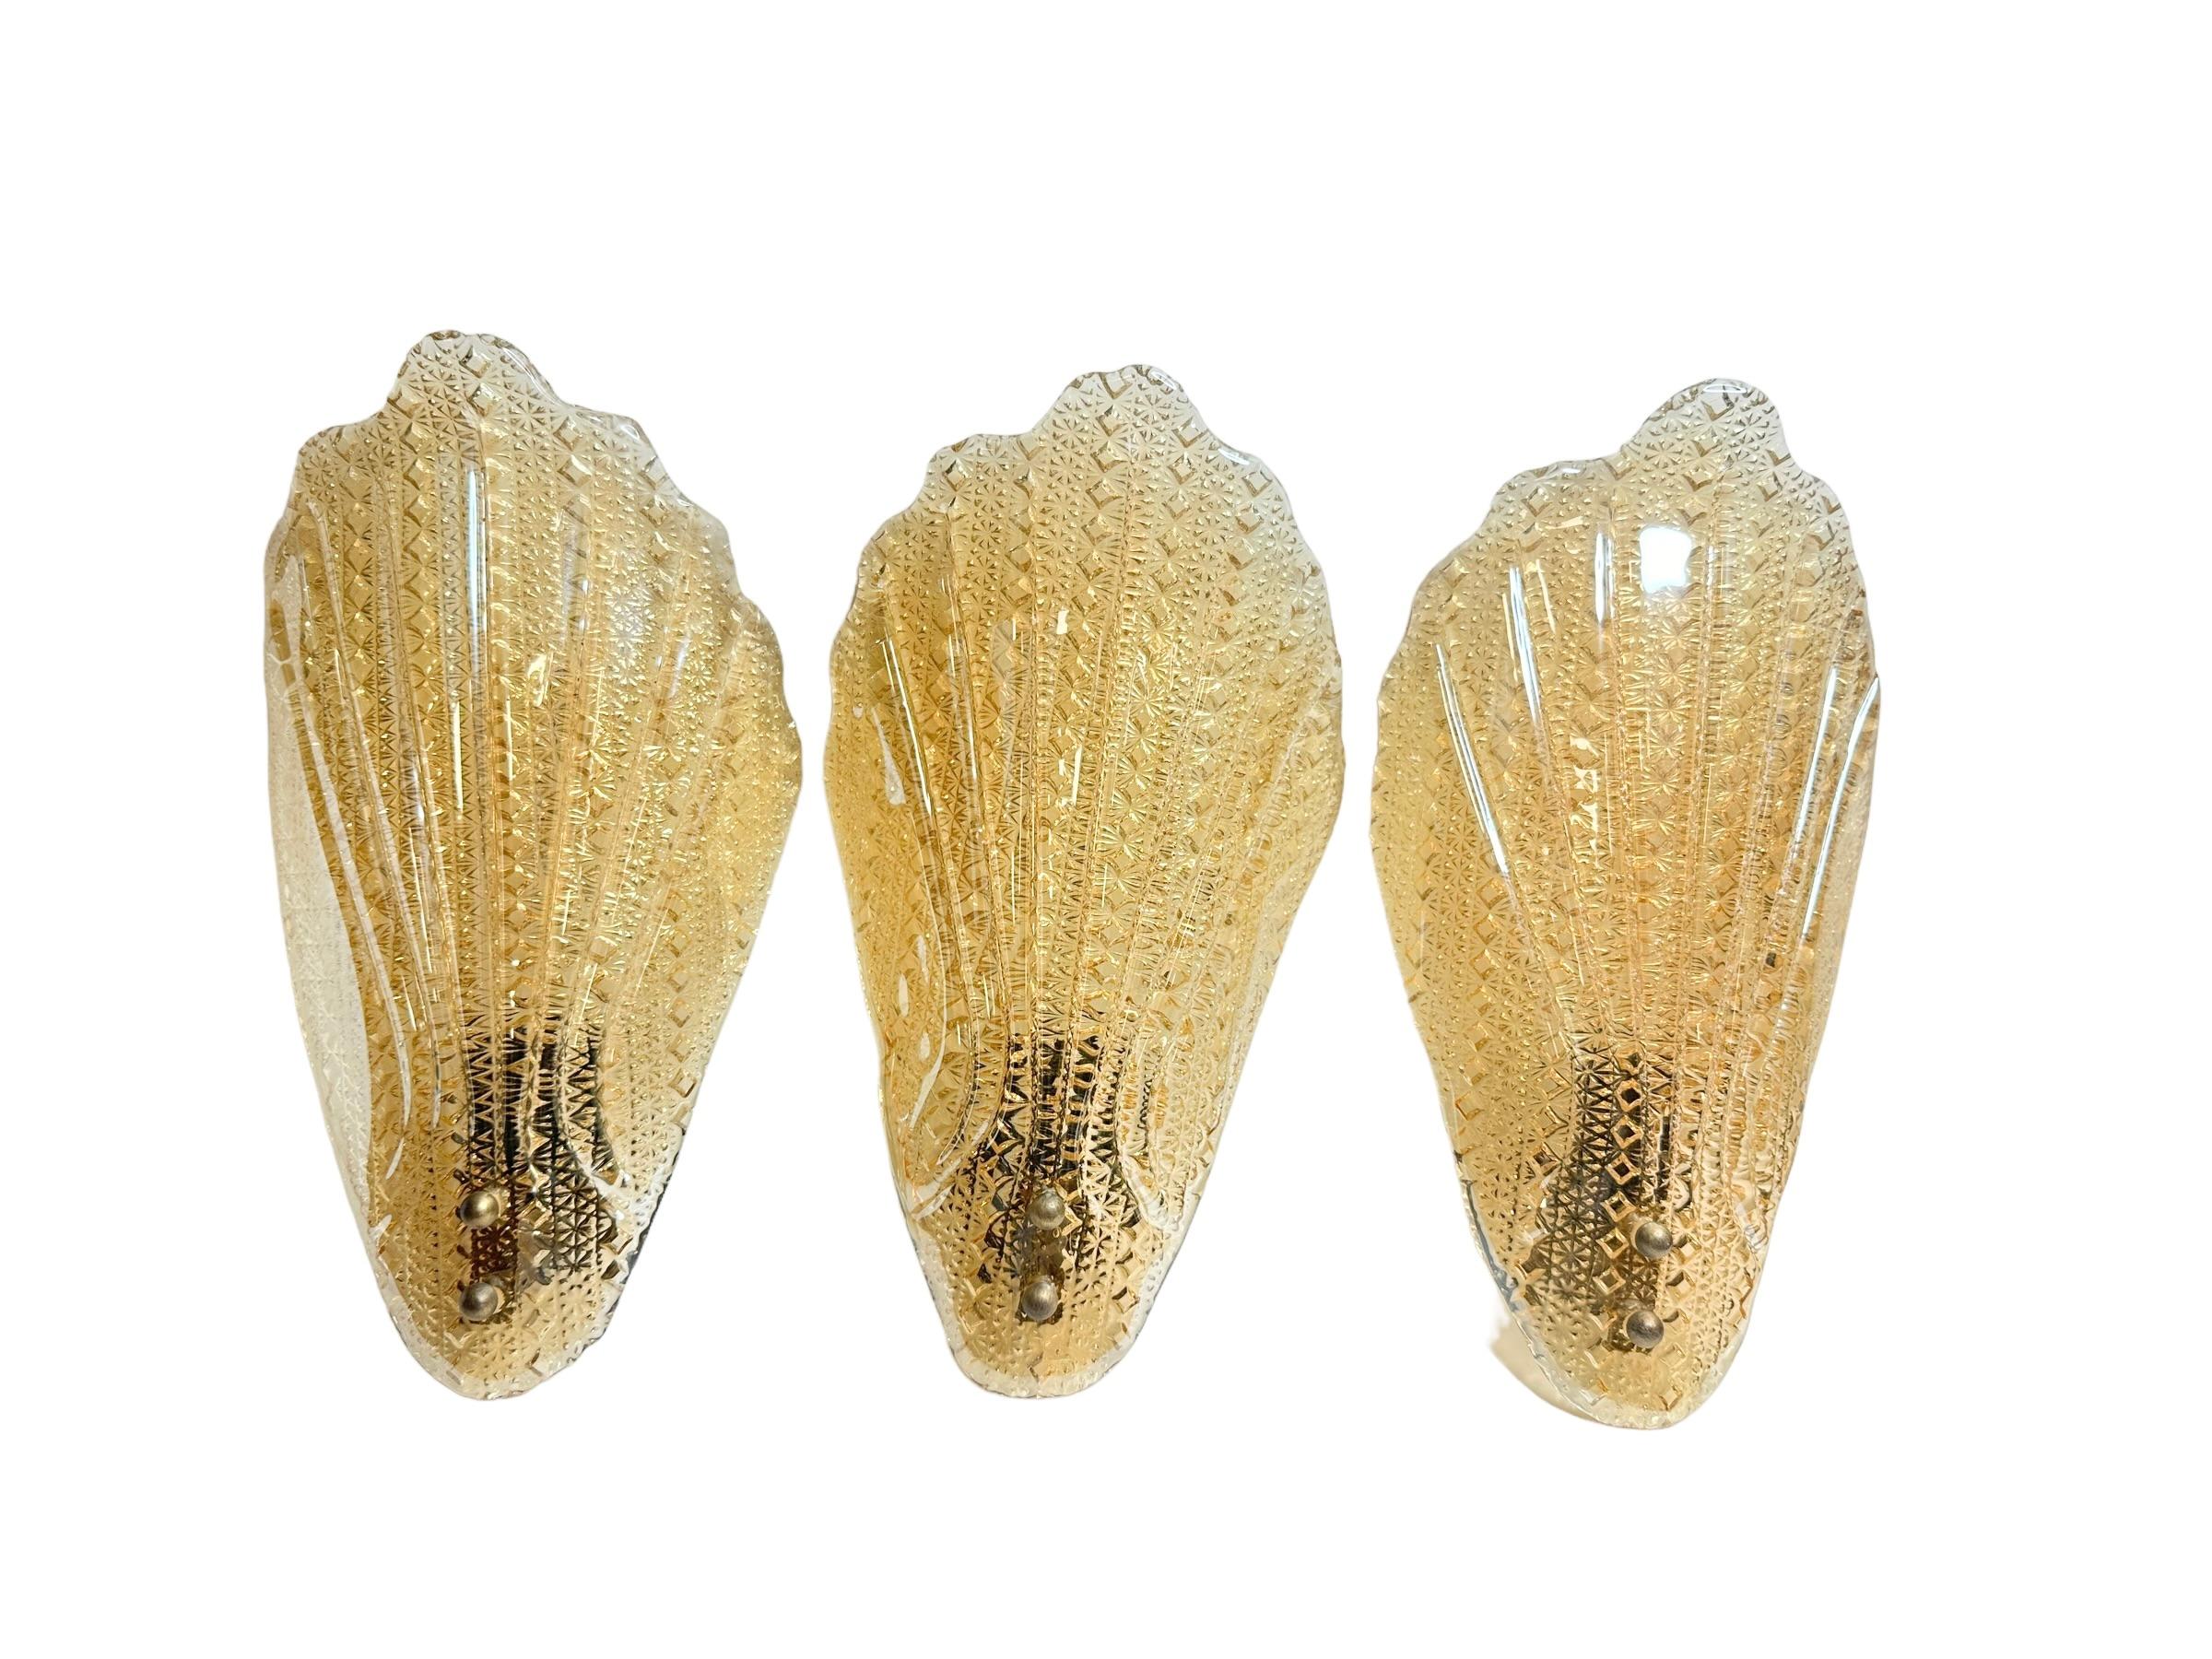 Incredible mid century Murano glass leaf wall sconce with heavy brass fixture. This wonderful piece was designed in Italy by Barovier & Toso during the 1960s.
Each sconce is outstanding as the way the leaf is designed in detail on the edges and